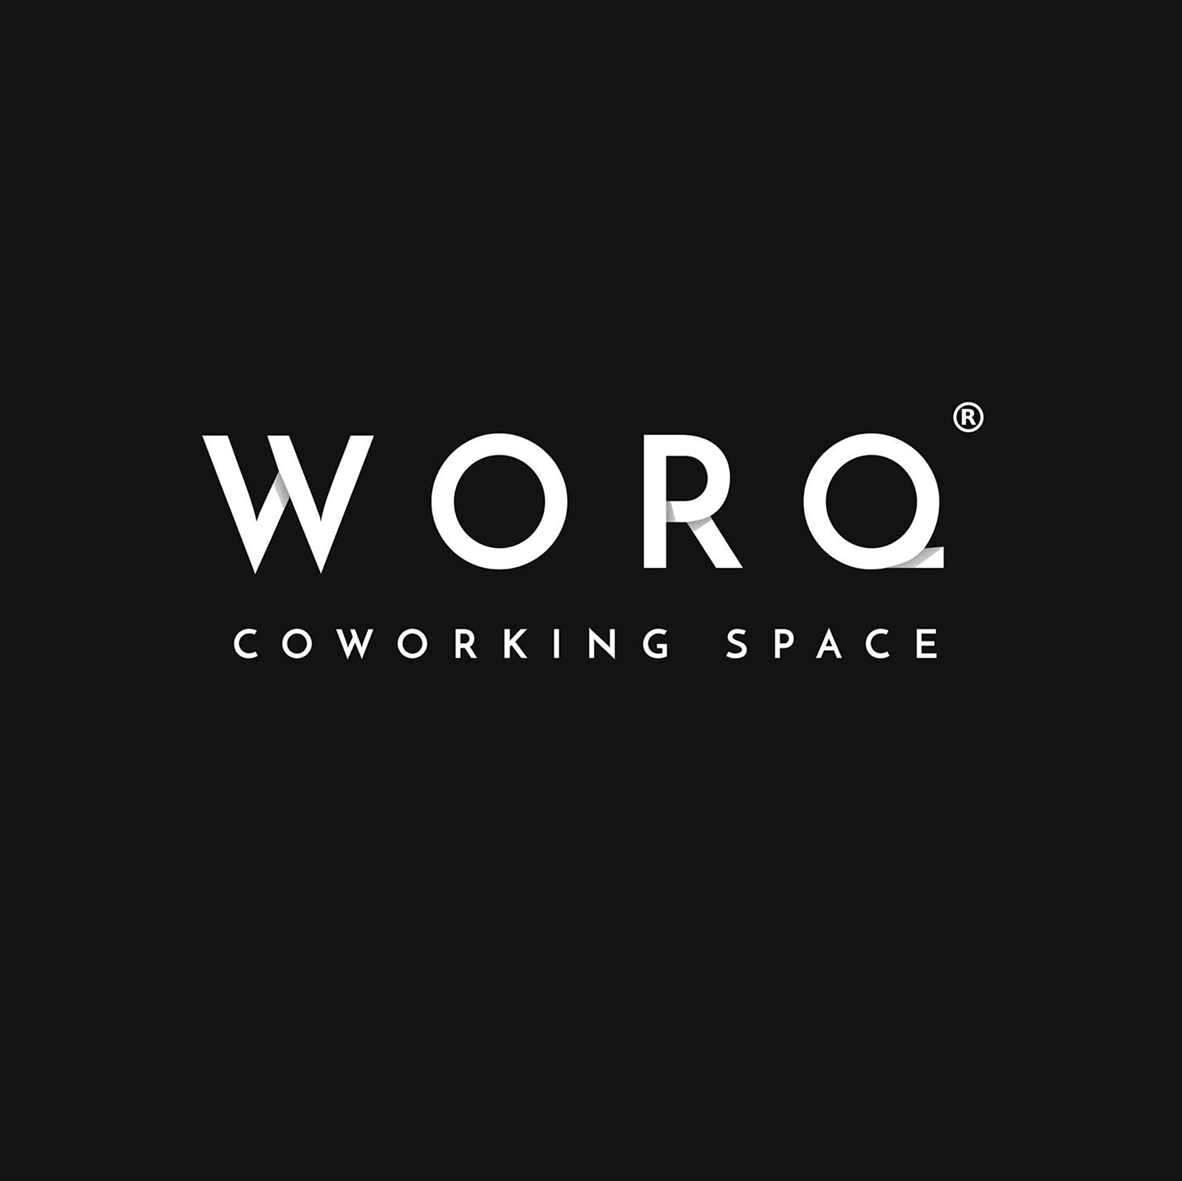 worq coworking space logo 004